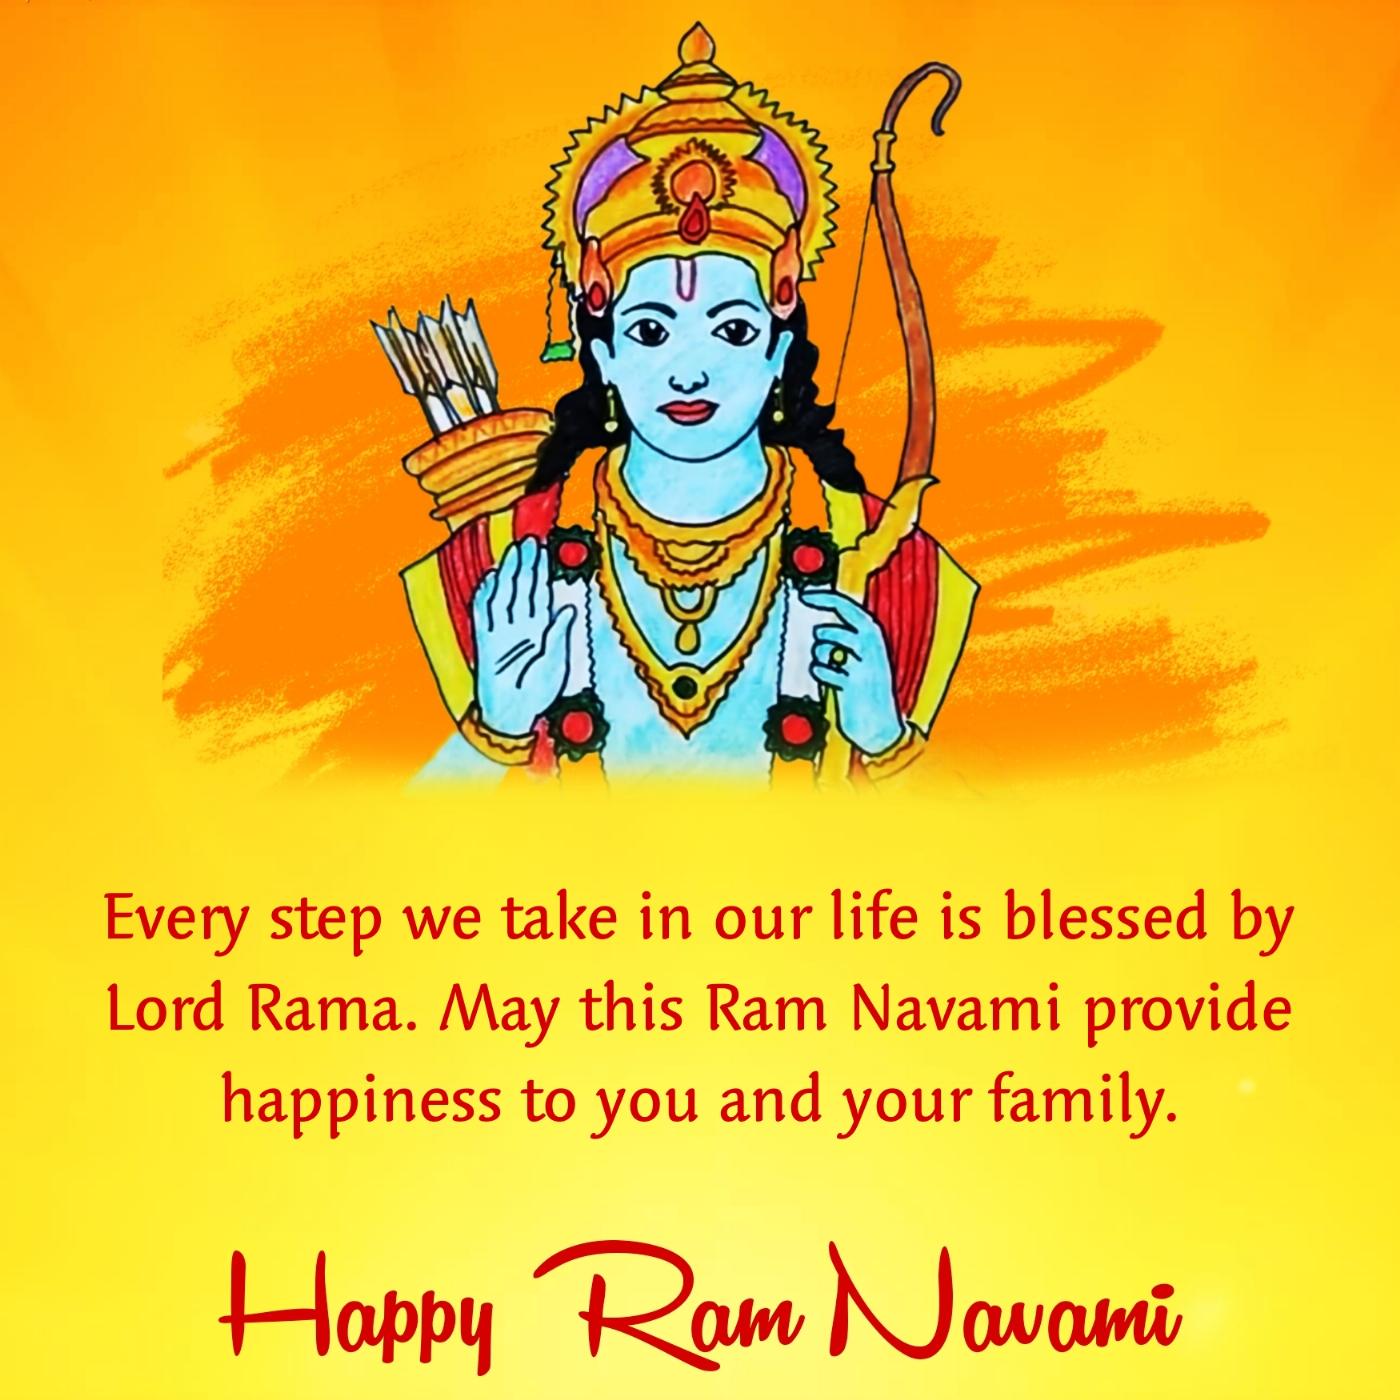 Every step we take in our life is blessed by Lord Rama